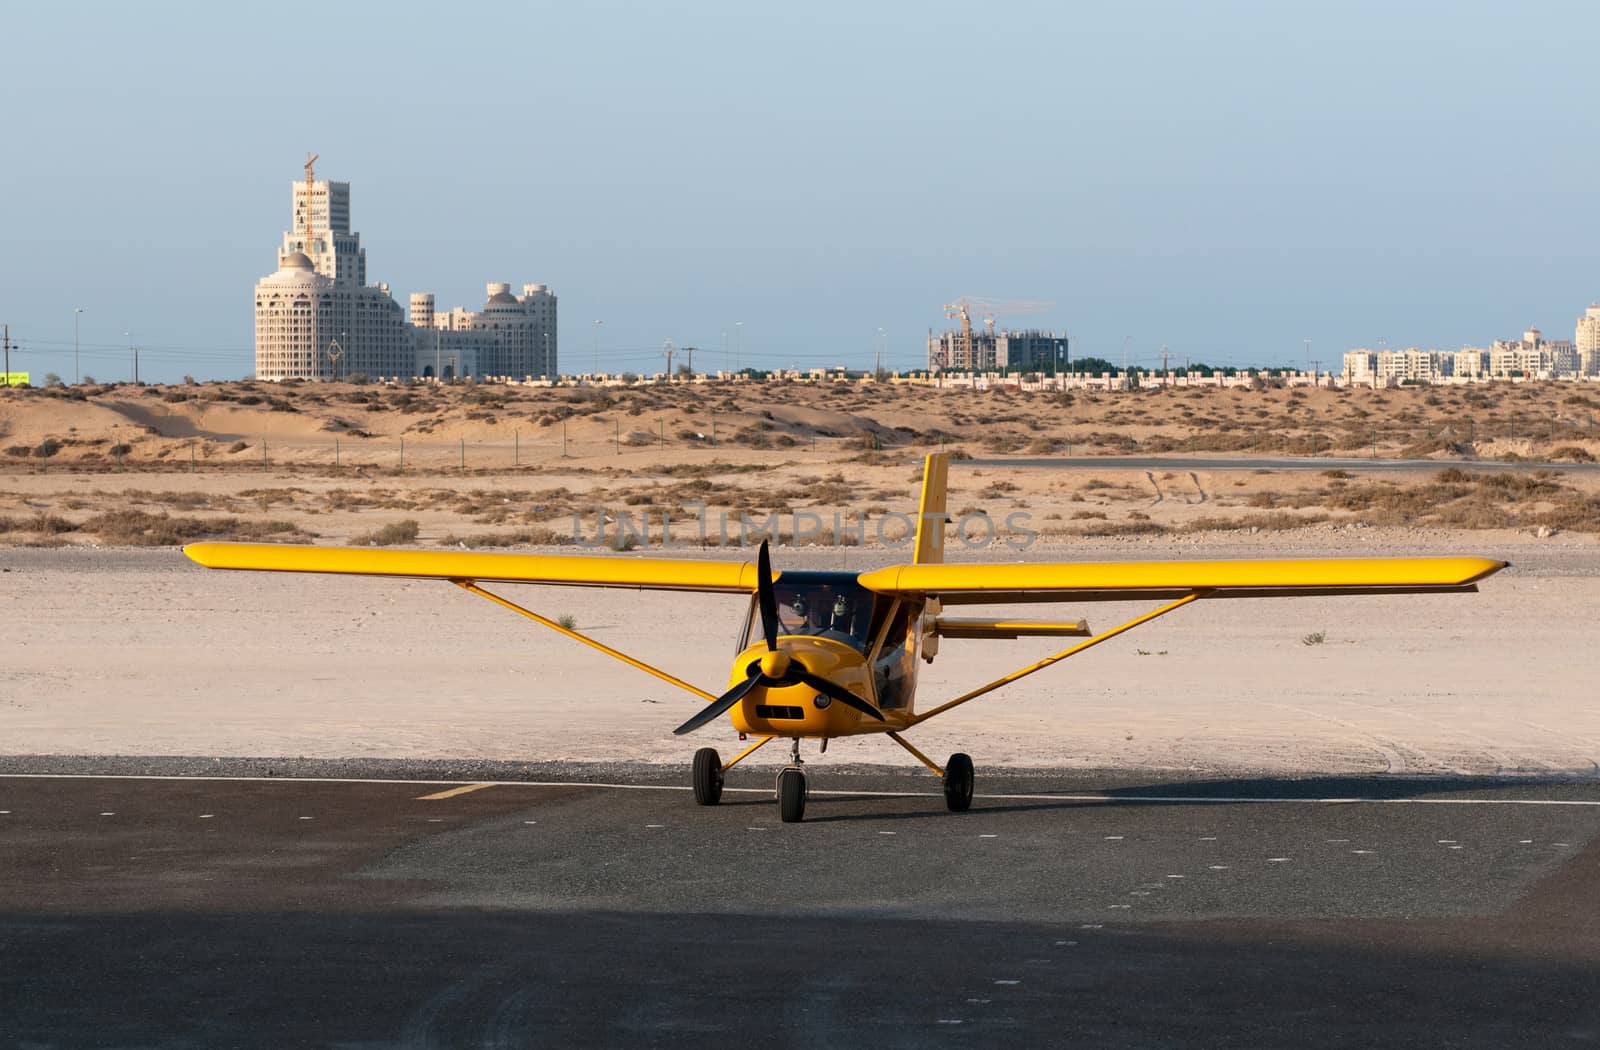 The Aeroprakt A-22 Foxbat is a two seat, high-wing, tricycle gear ultralight aircraft, United Arab Emirates